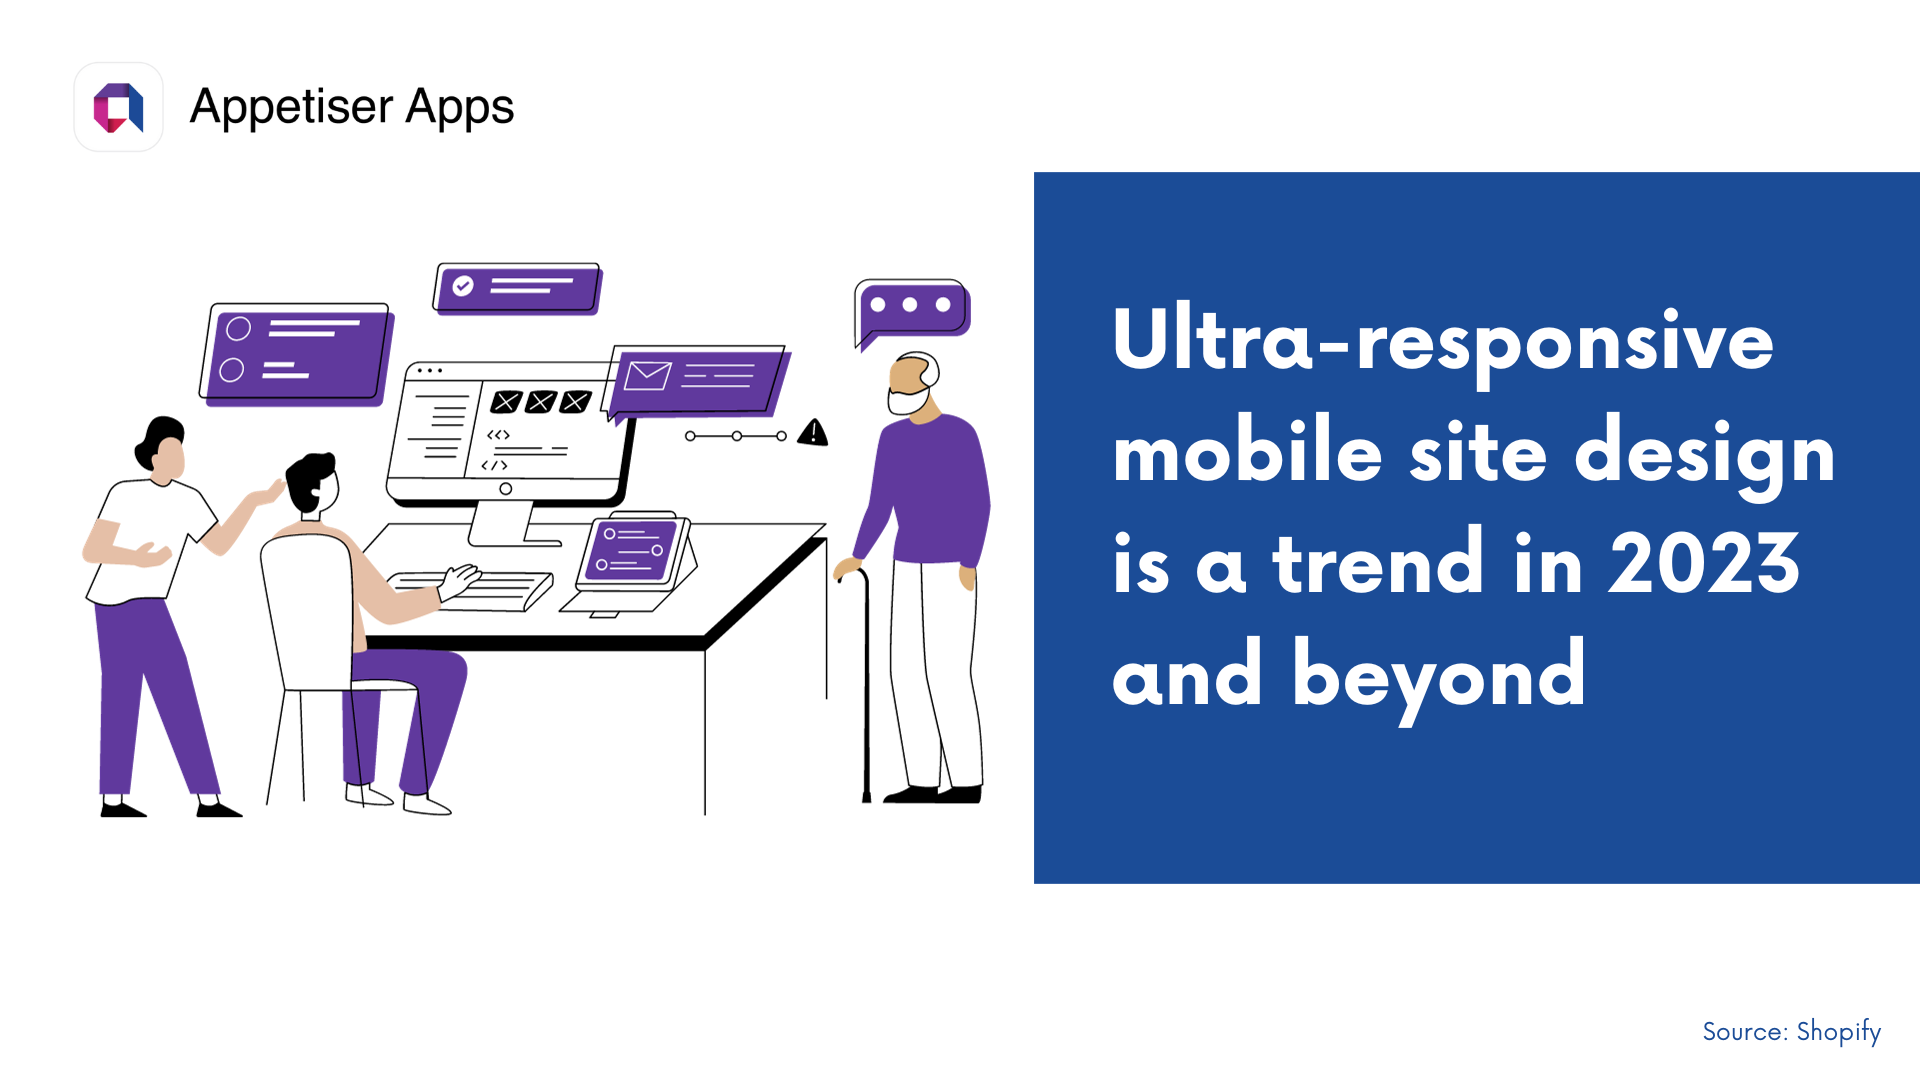 MES: mobile ecommerce statistics and trends like ultra responsiveness onsite design